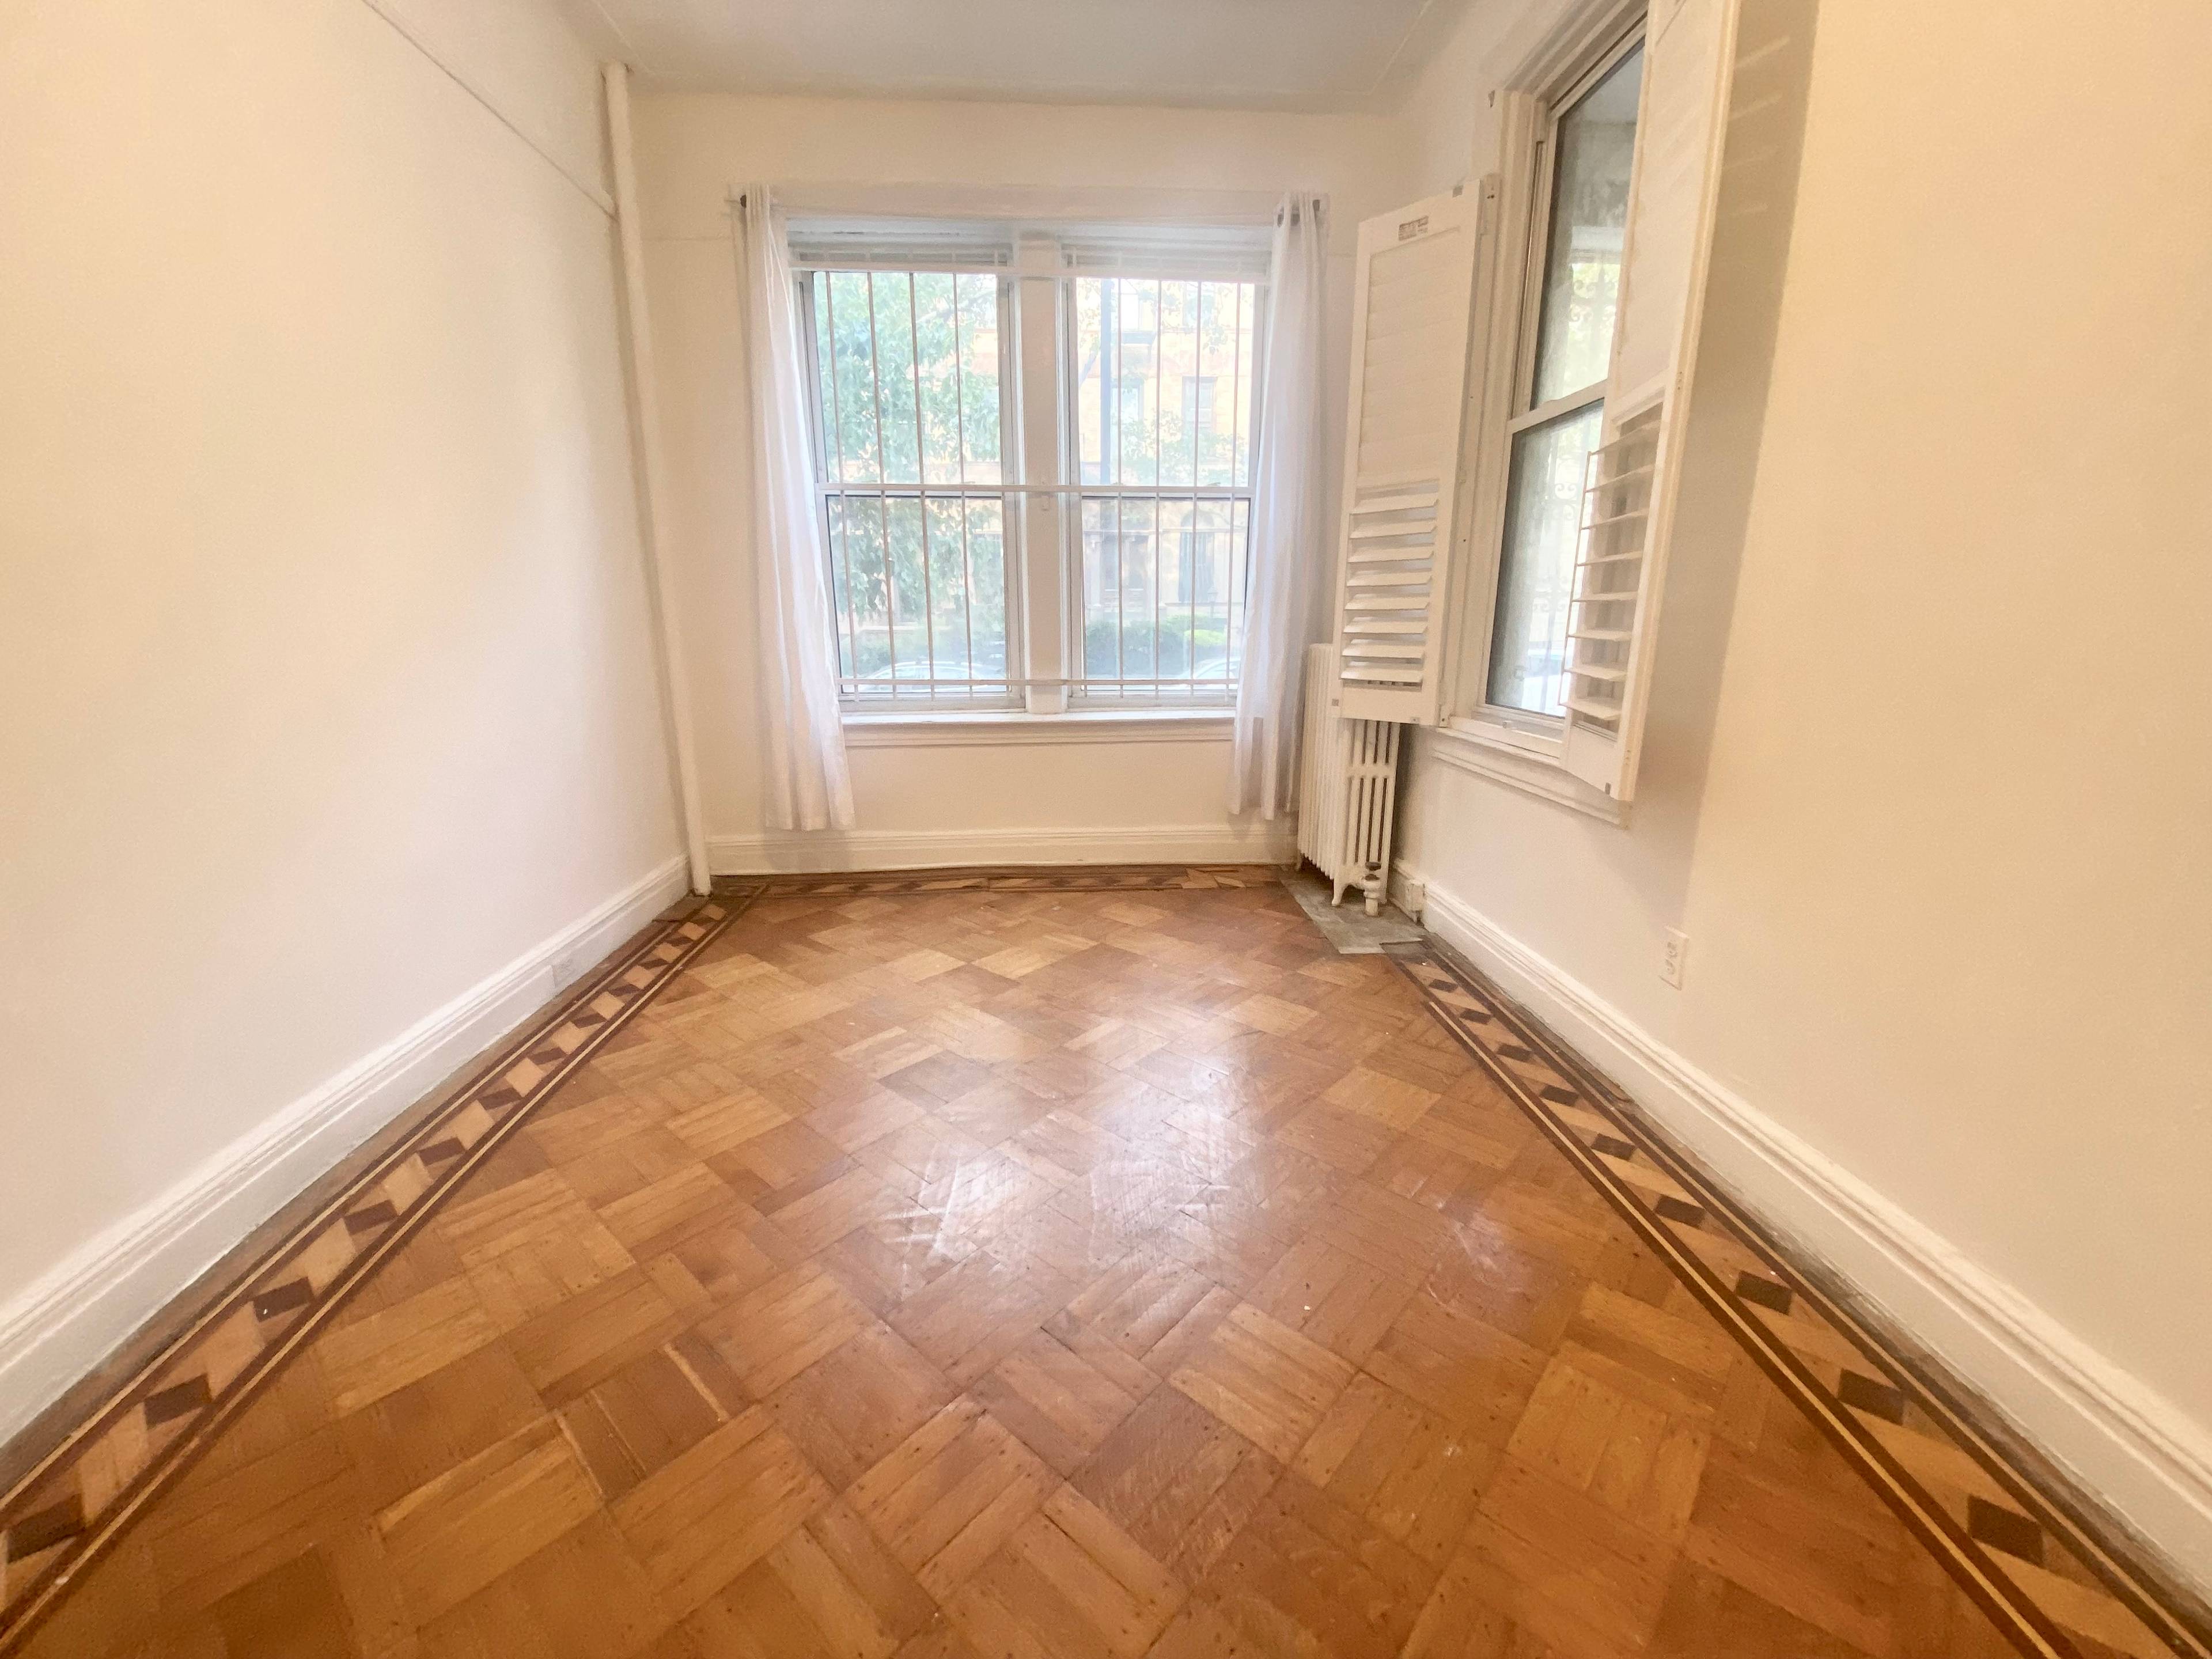 Rarely available and a stone's throw away from Prospect Park.